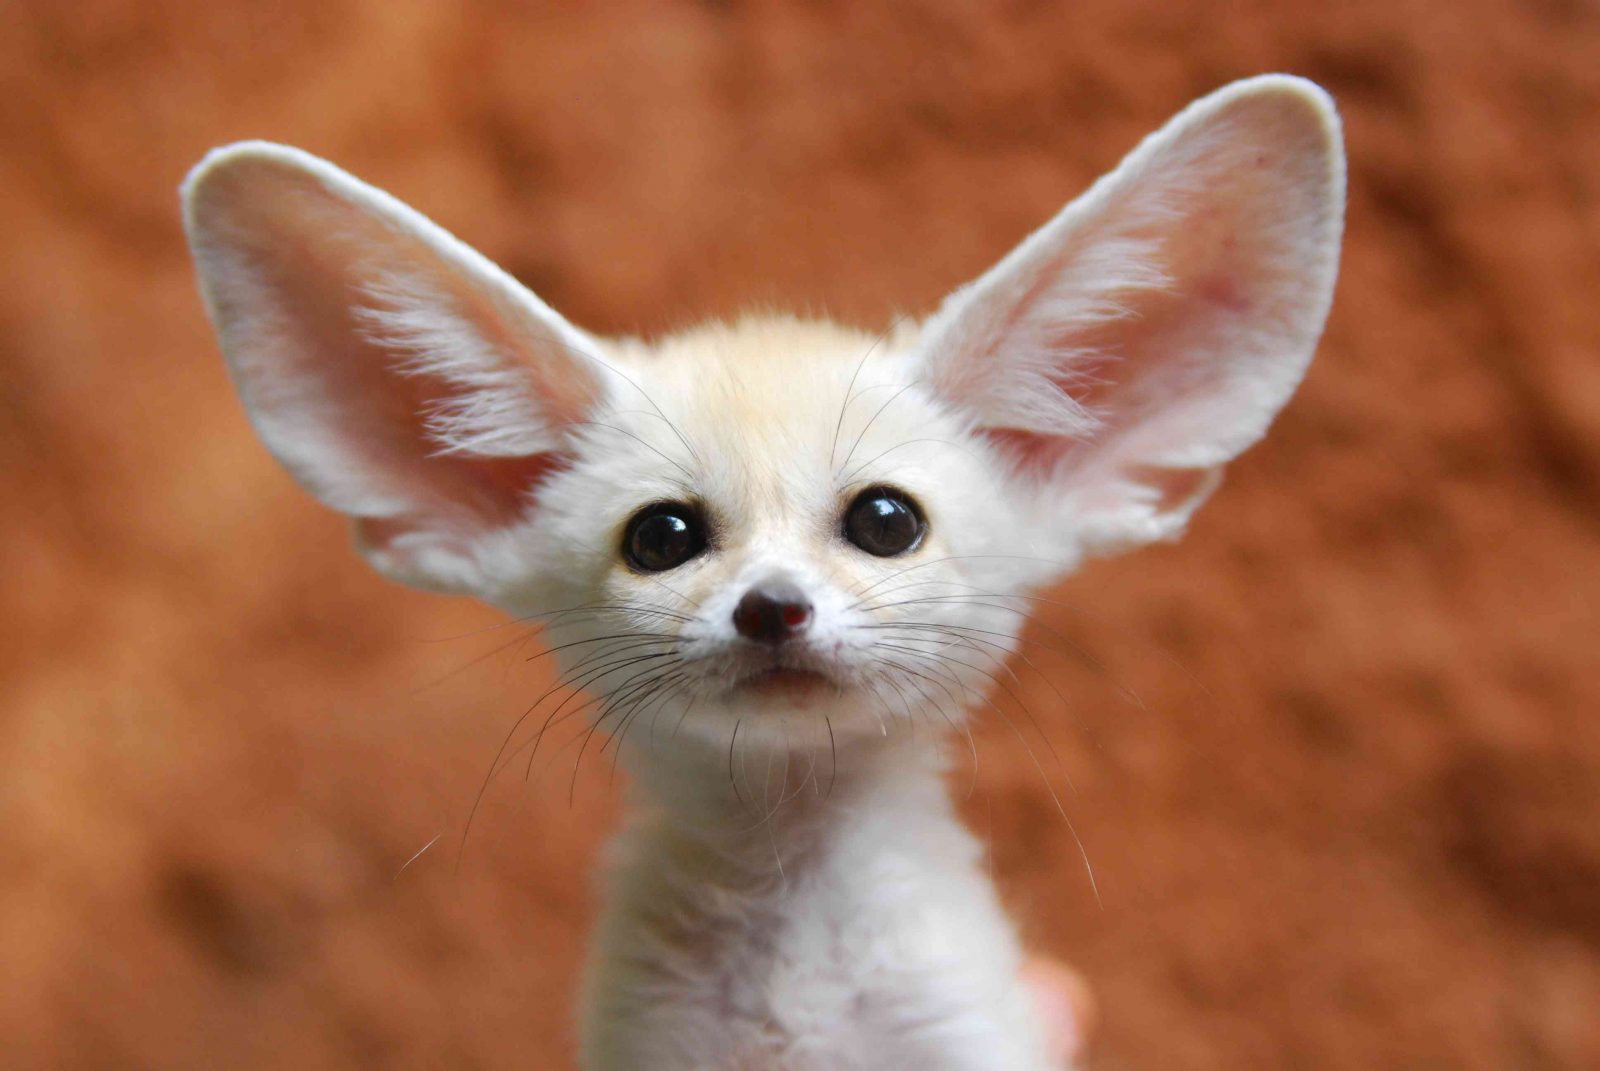 African Countries In 3 Clues Fennec fox